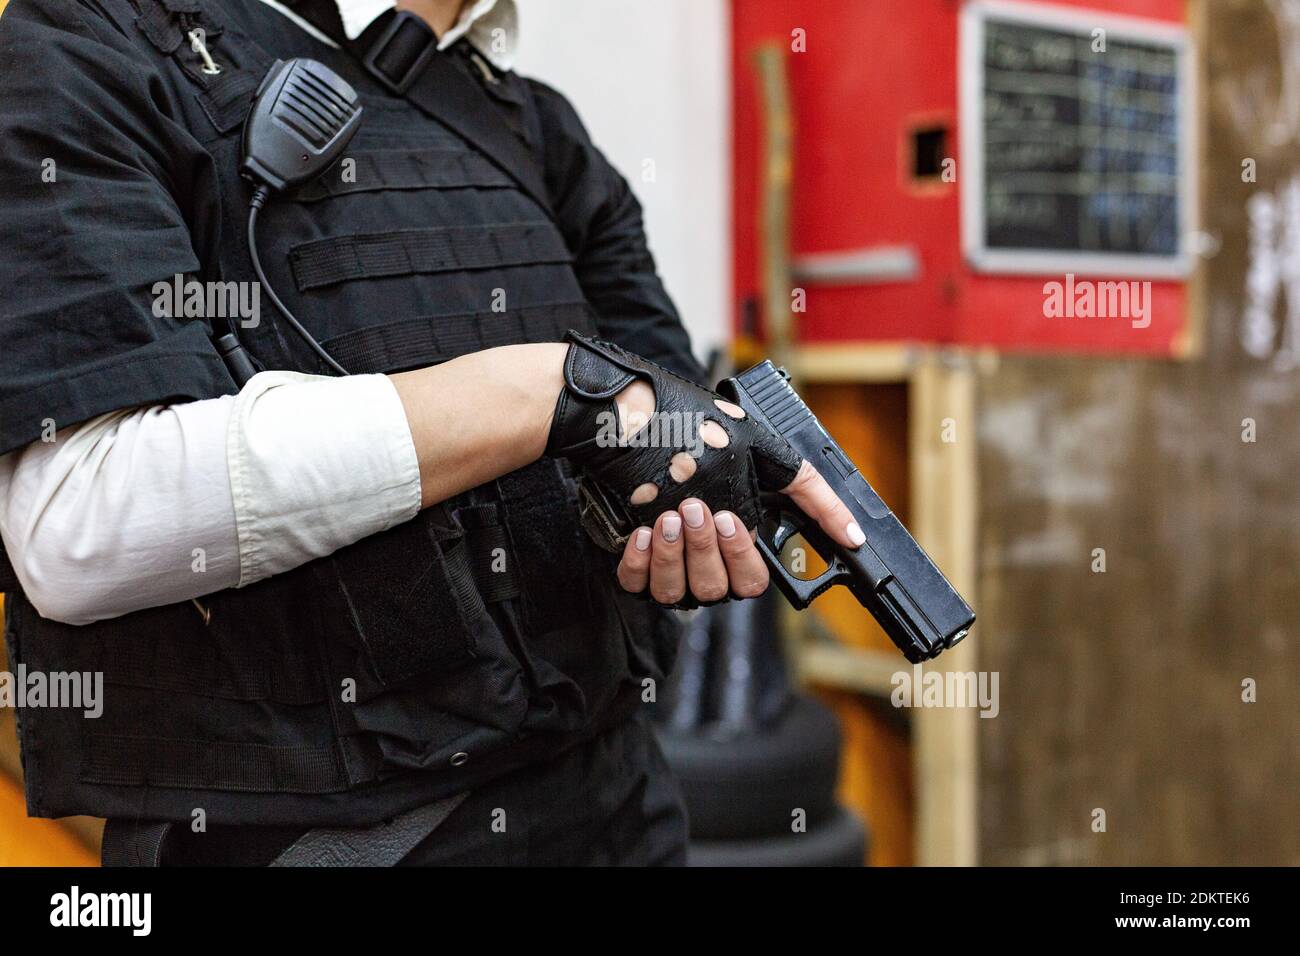 Midsection Of Police Holding Gun Stock Photo